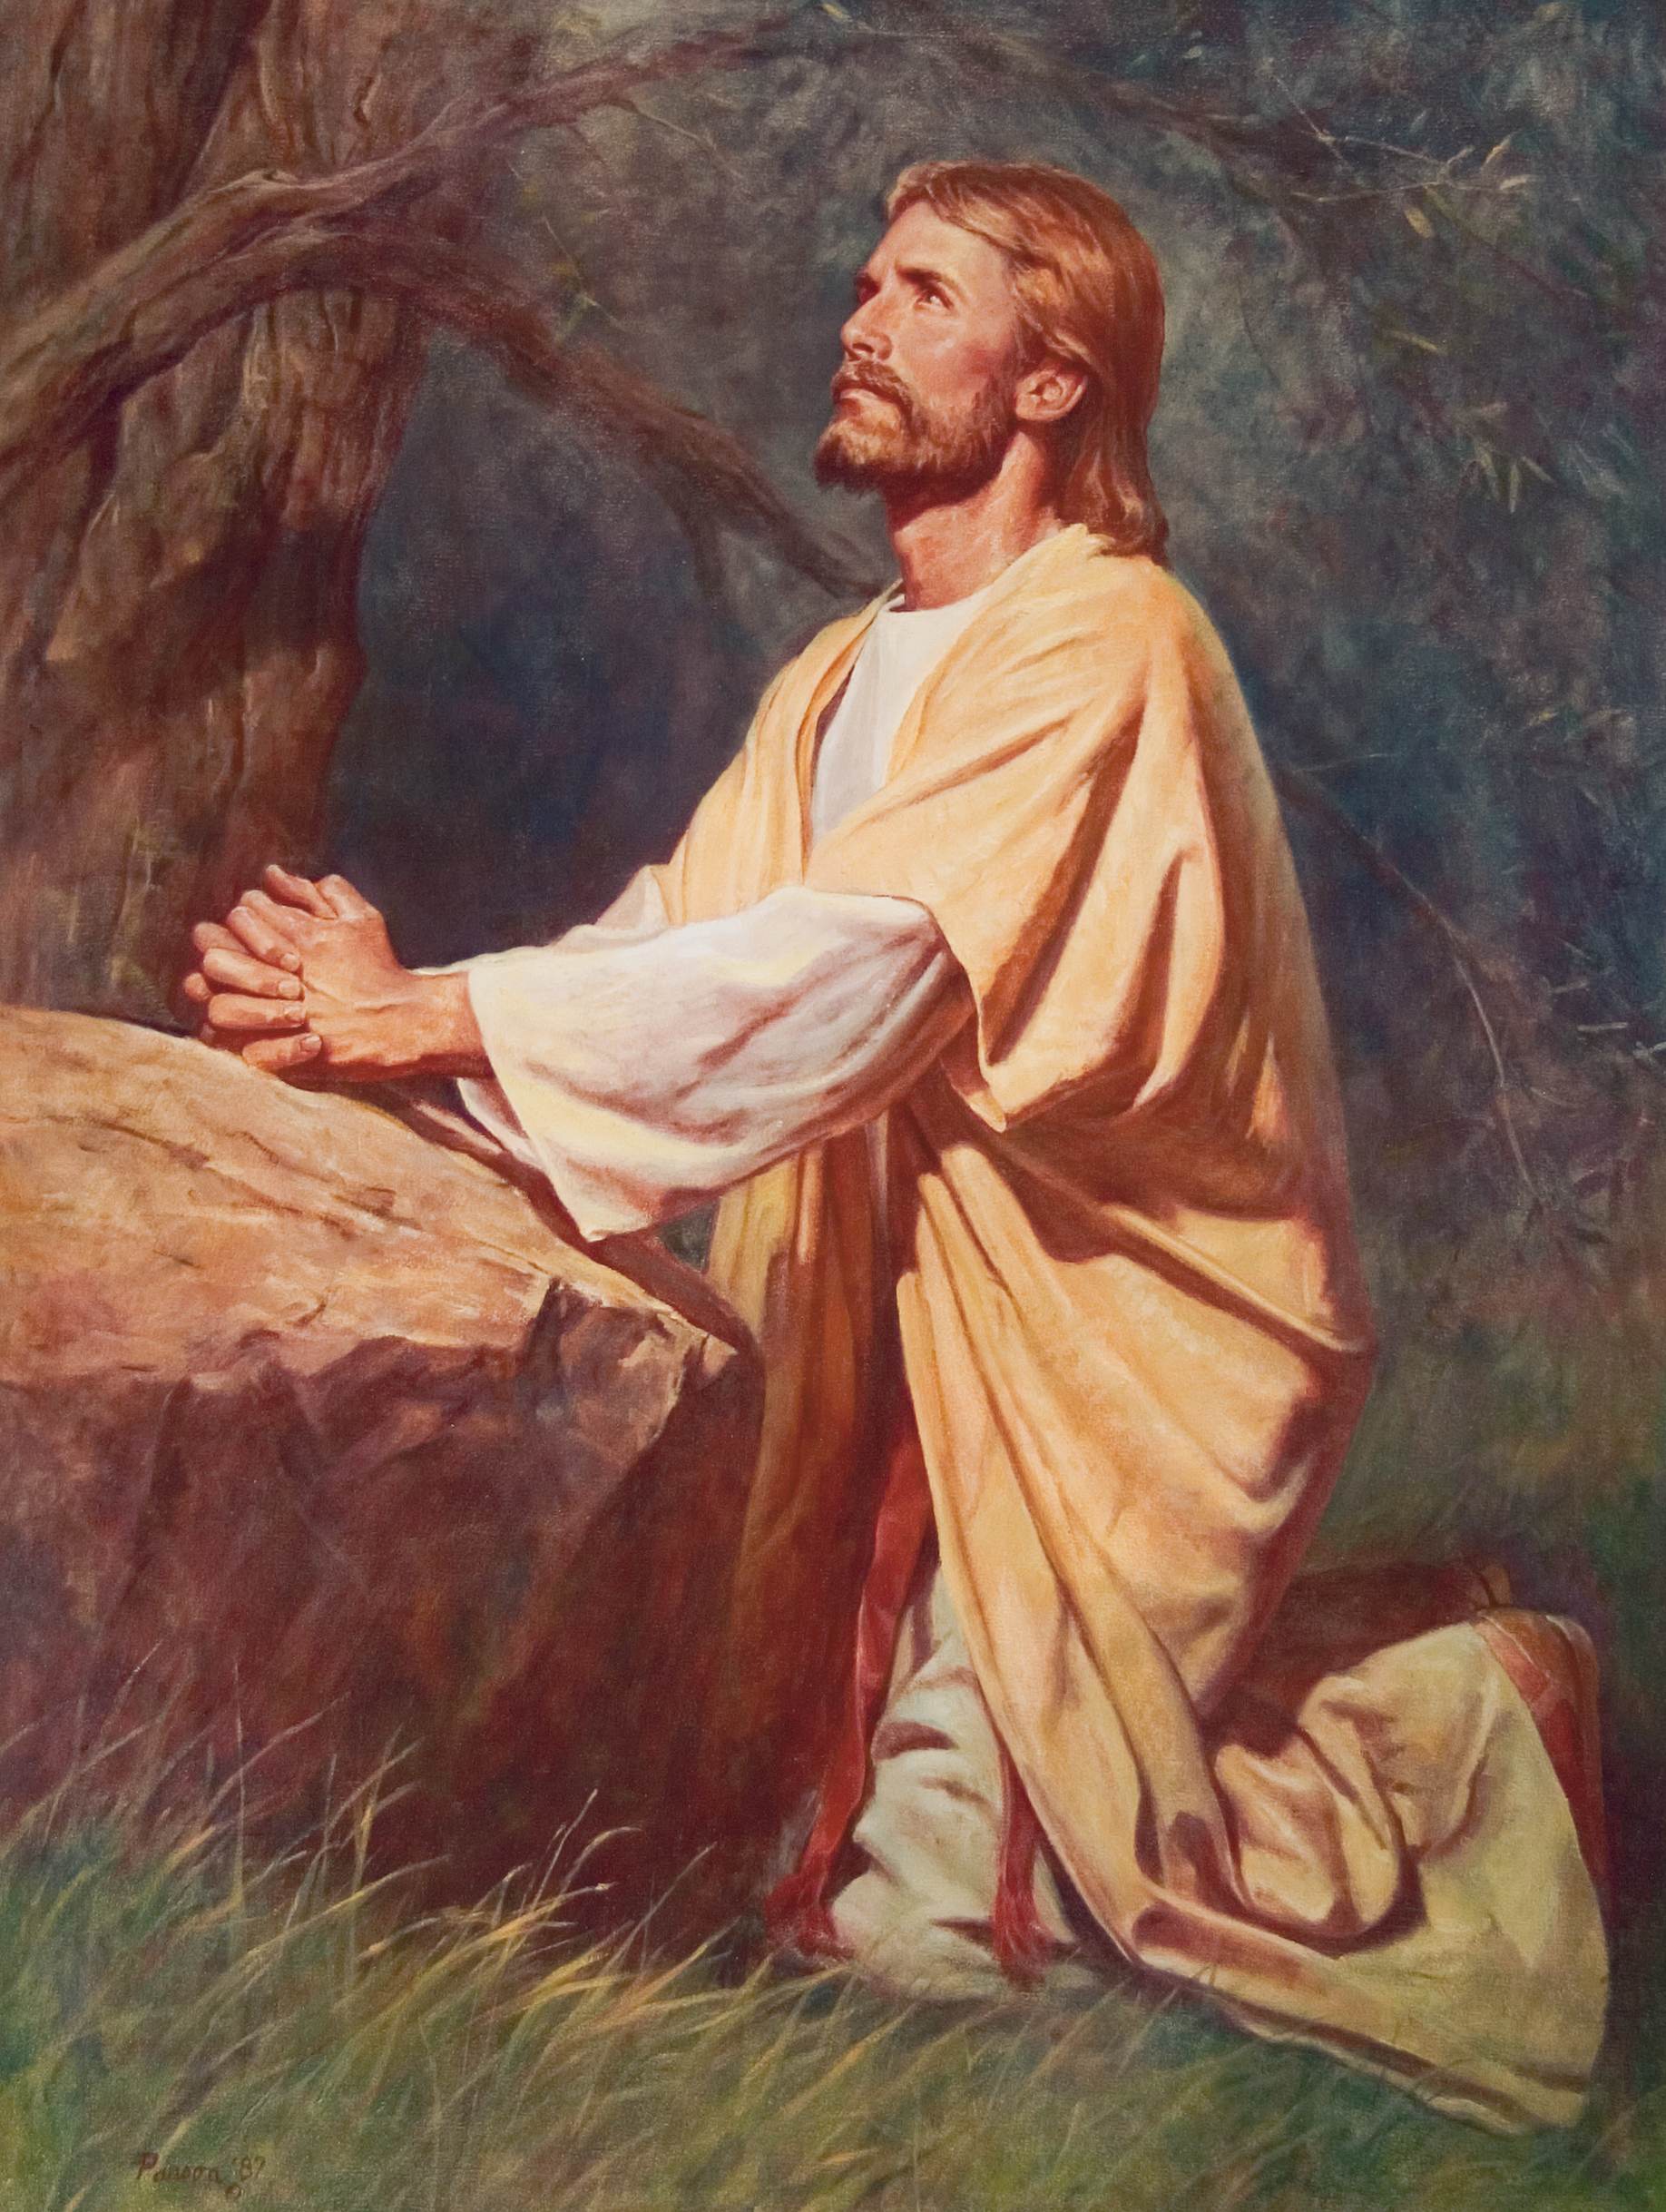 Christ in yellow and white robes, kneeling in the grass next to a large rock, with His hands clasped, looking upward.